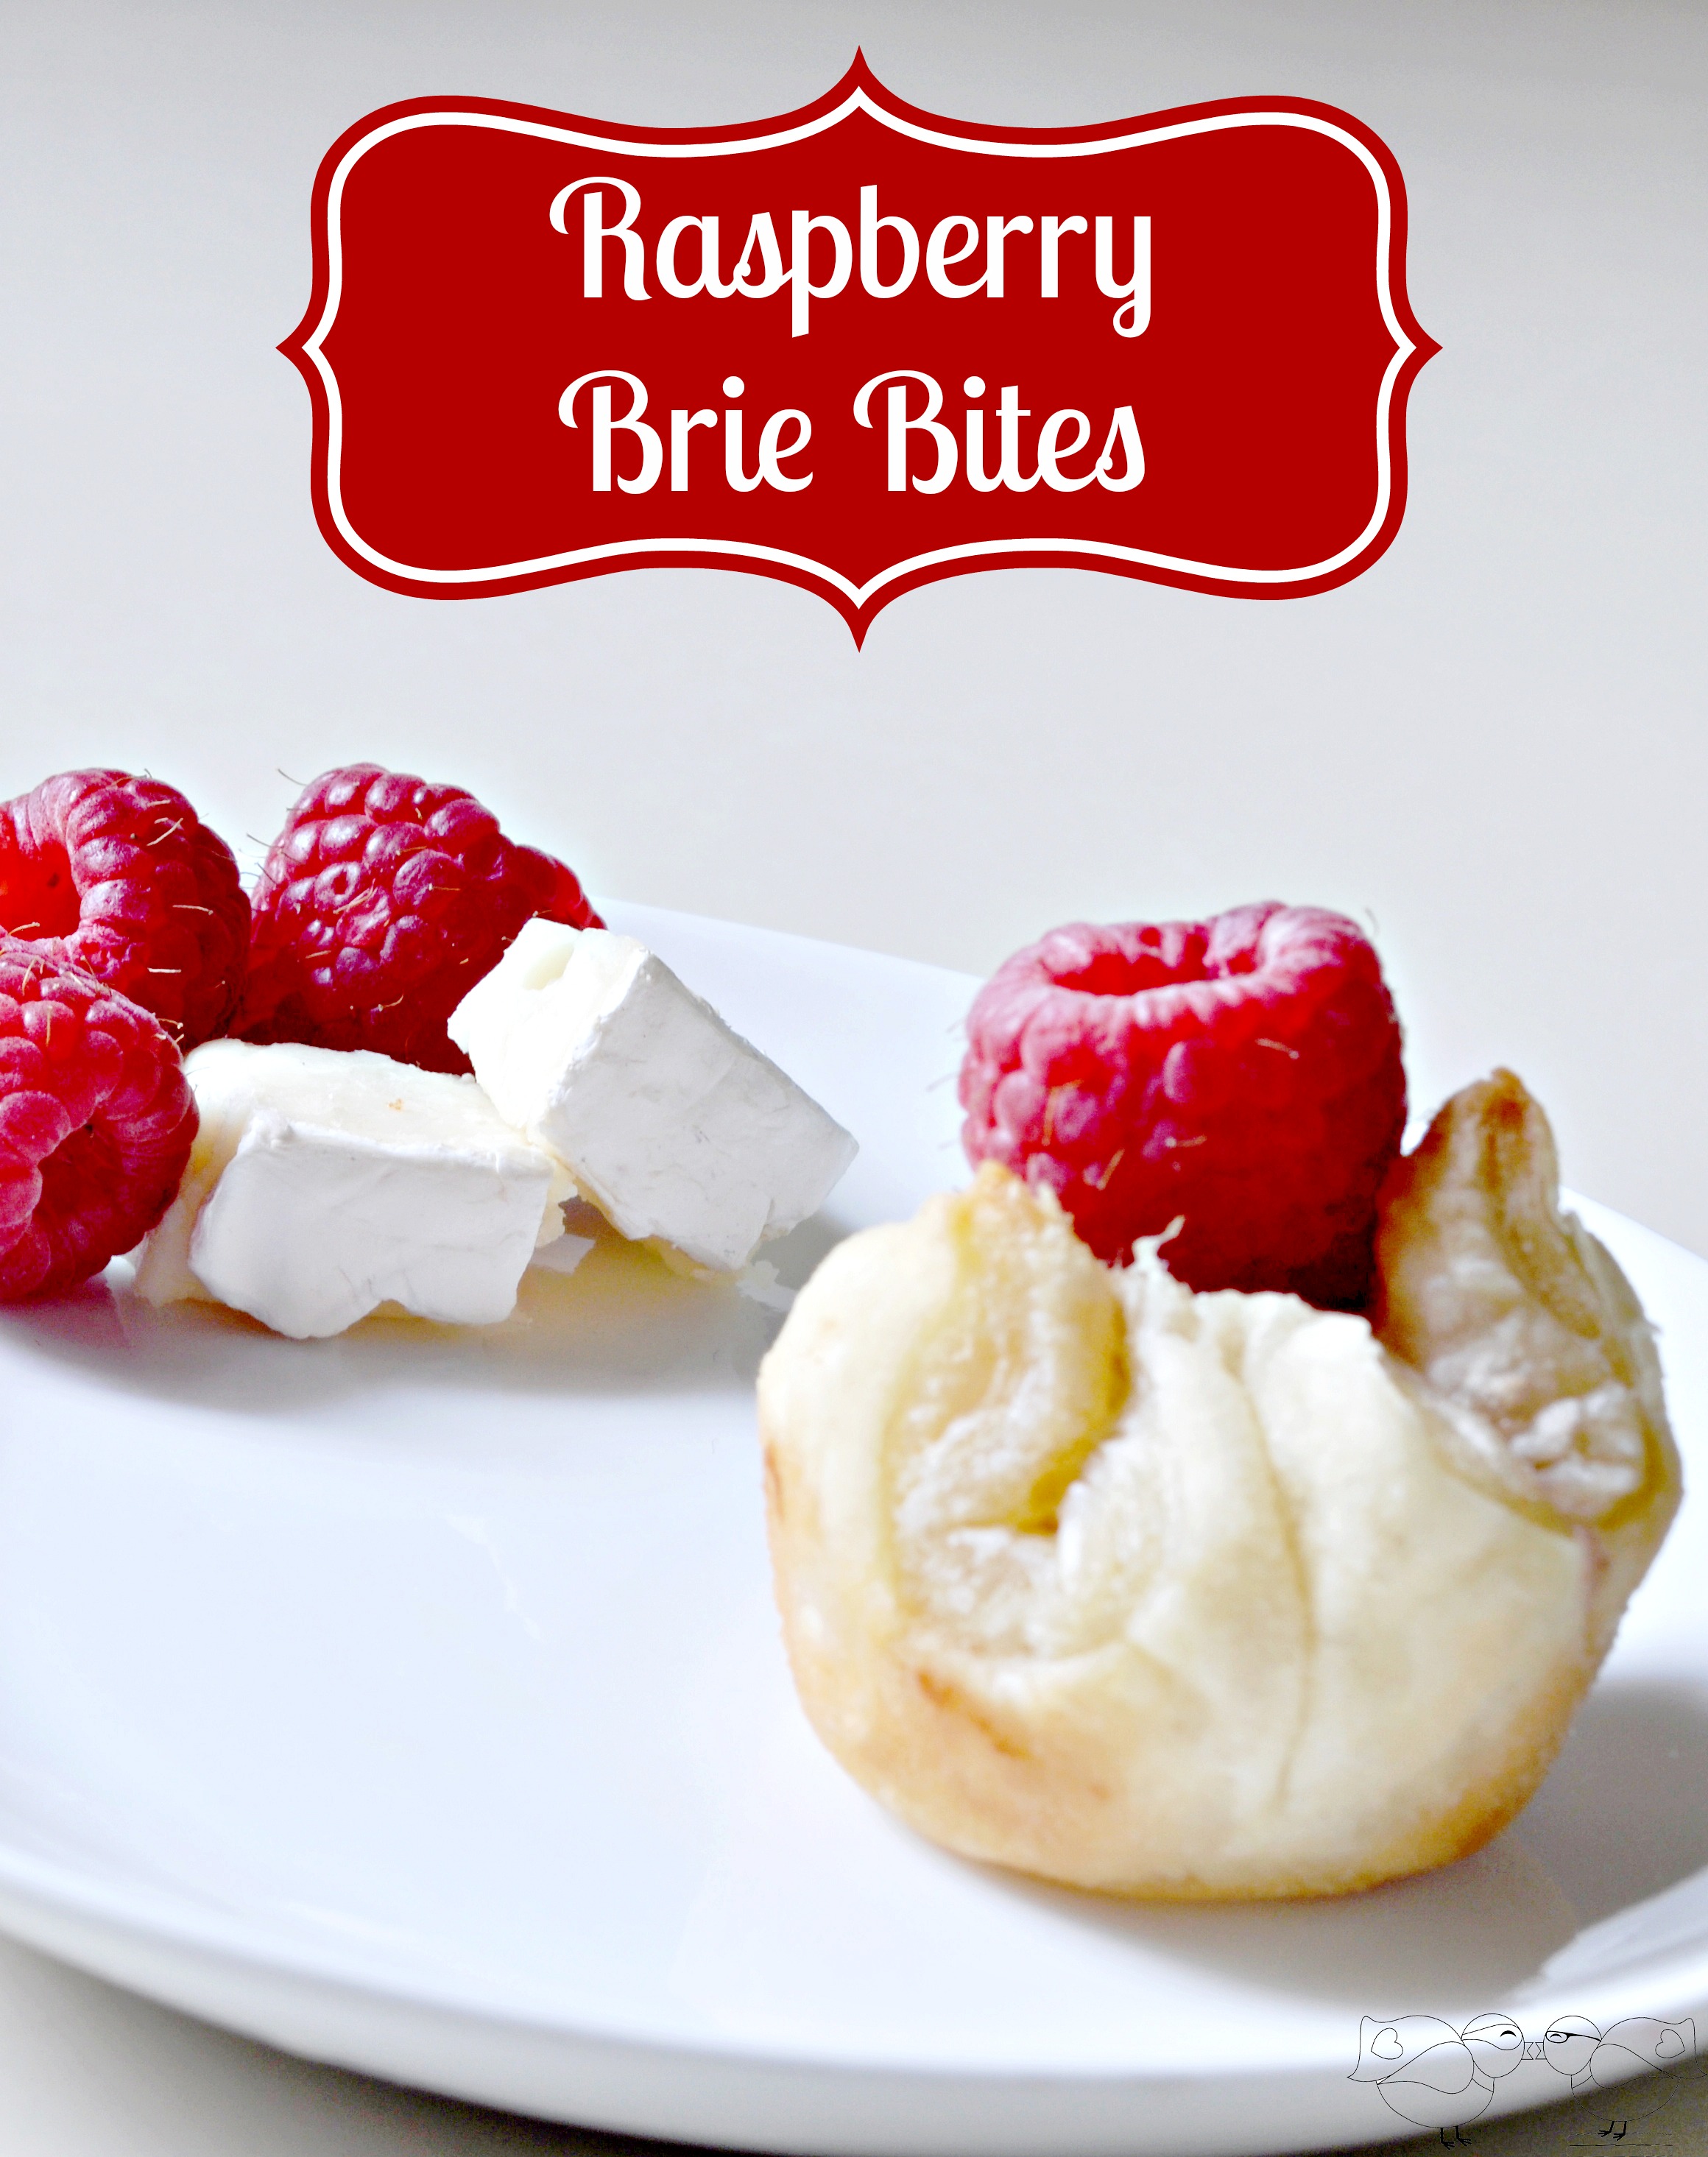 Wine and Cheese Date Night with Homemade Brie Bites - Raspberry Brie Bites and Pear, Honey Pecan Brie Bites {The Love Nerds} #datenight #appetizer #puffpastry 